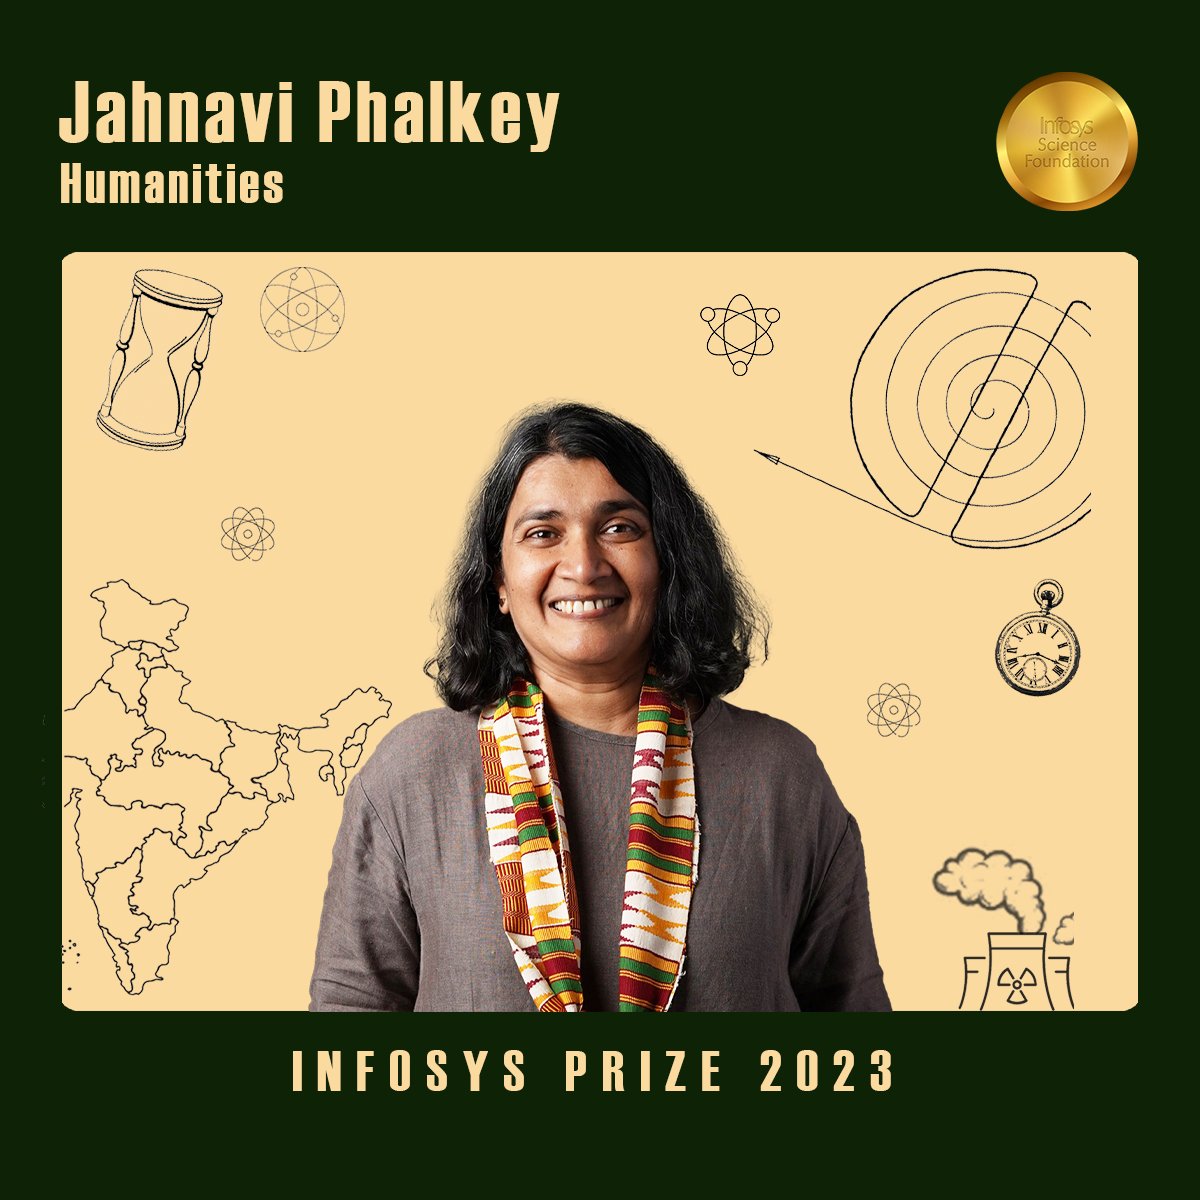 #InfosysPrize2023 in Humanities is awarded to historian @JahnaviPhalkey, @SciGalleryBlr, for her brilliant and granular insights into the individual, institutional, and material histories of scientific research in modern India.